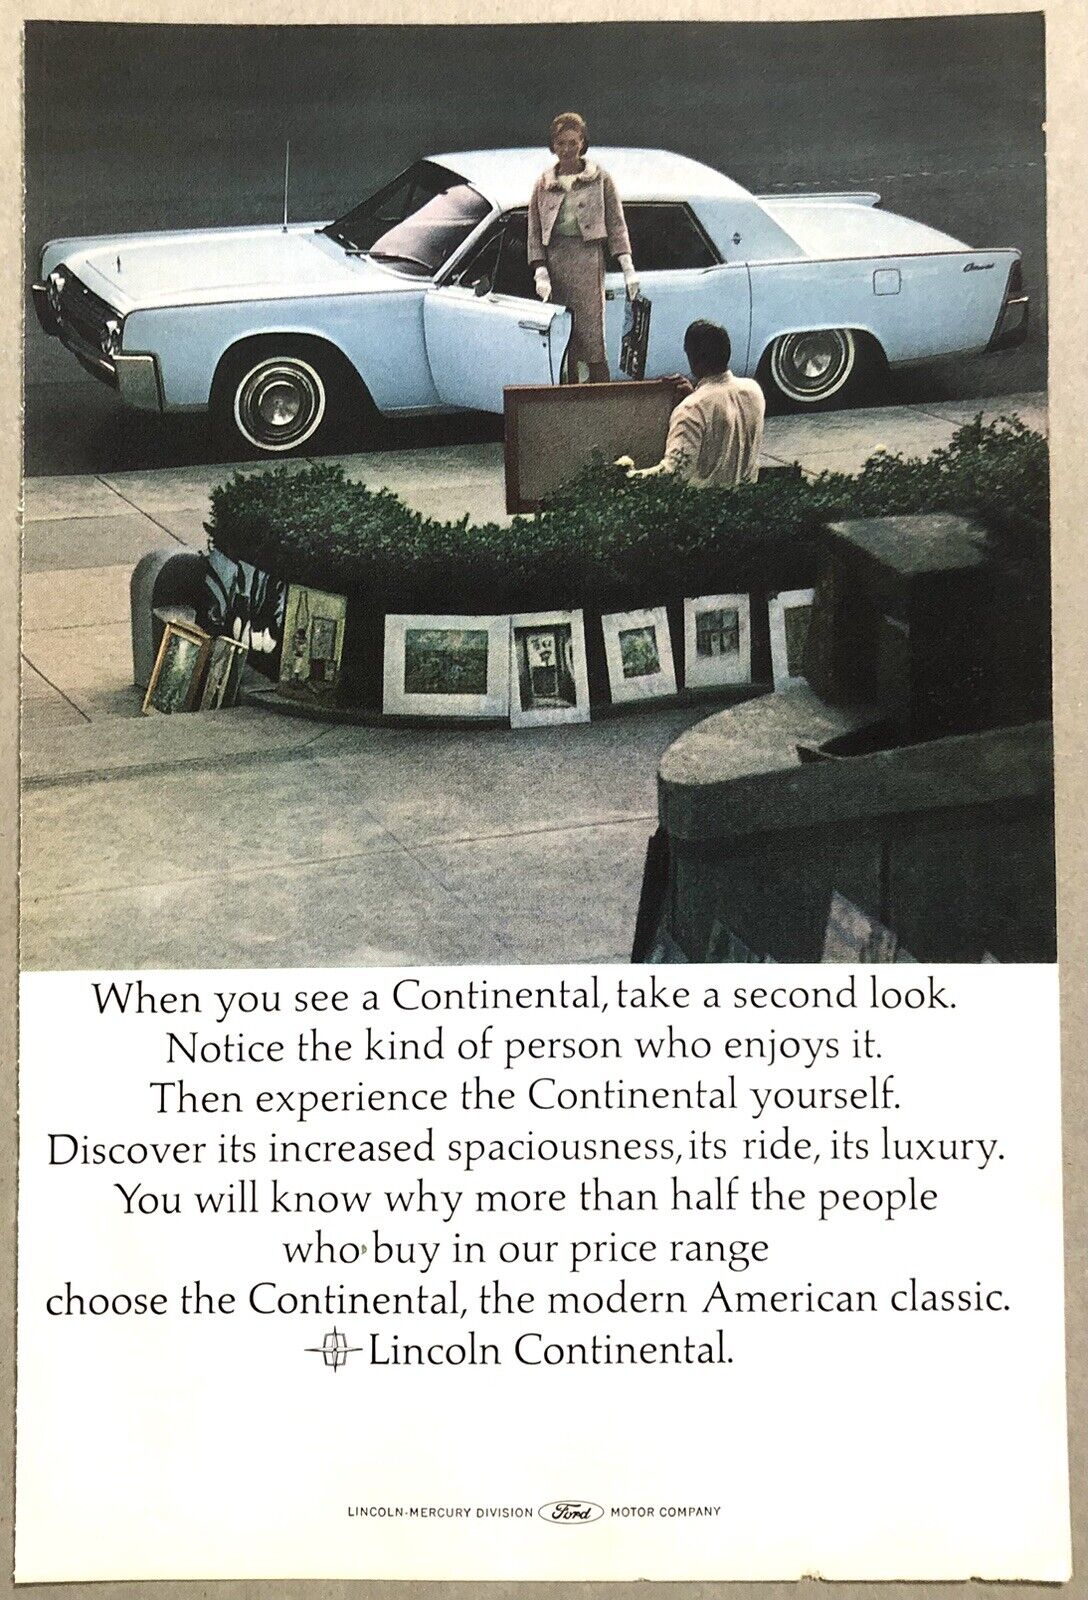 Vintage 1964 Original Print Advertisement Full Page - Lincoln Continental